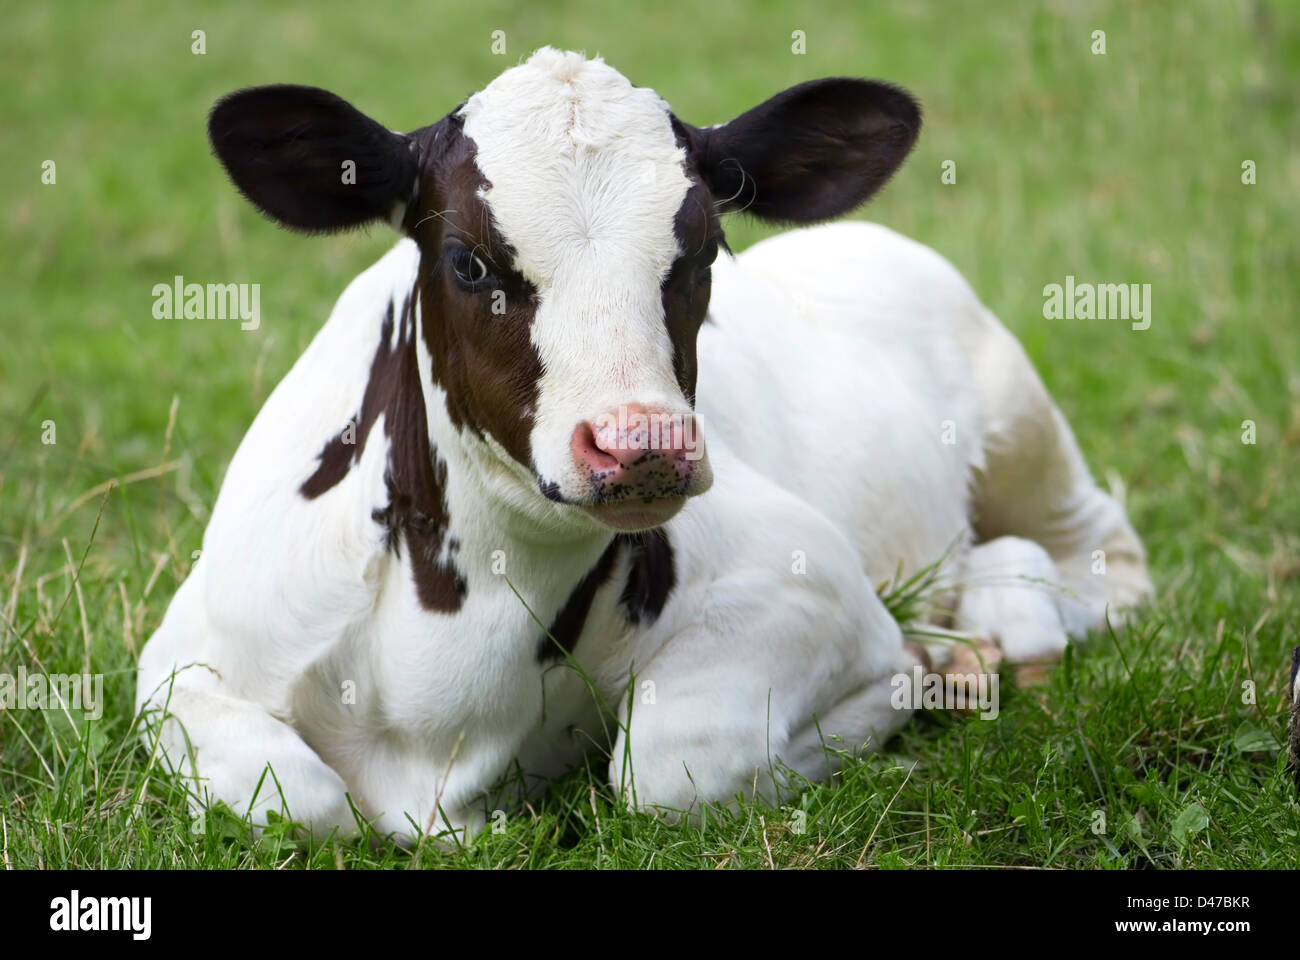 White and brown calf lying in grass Stock Photo